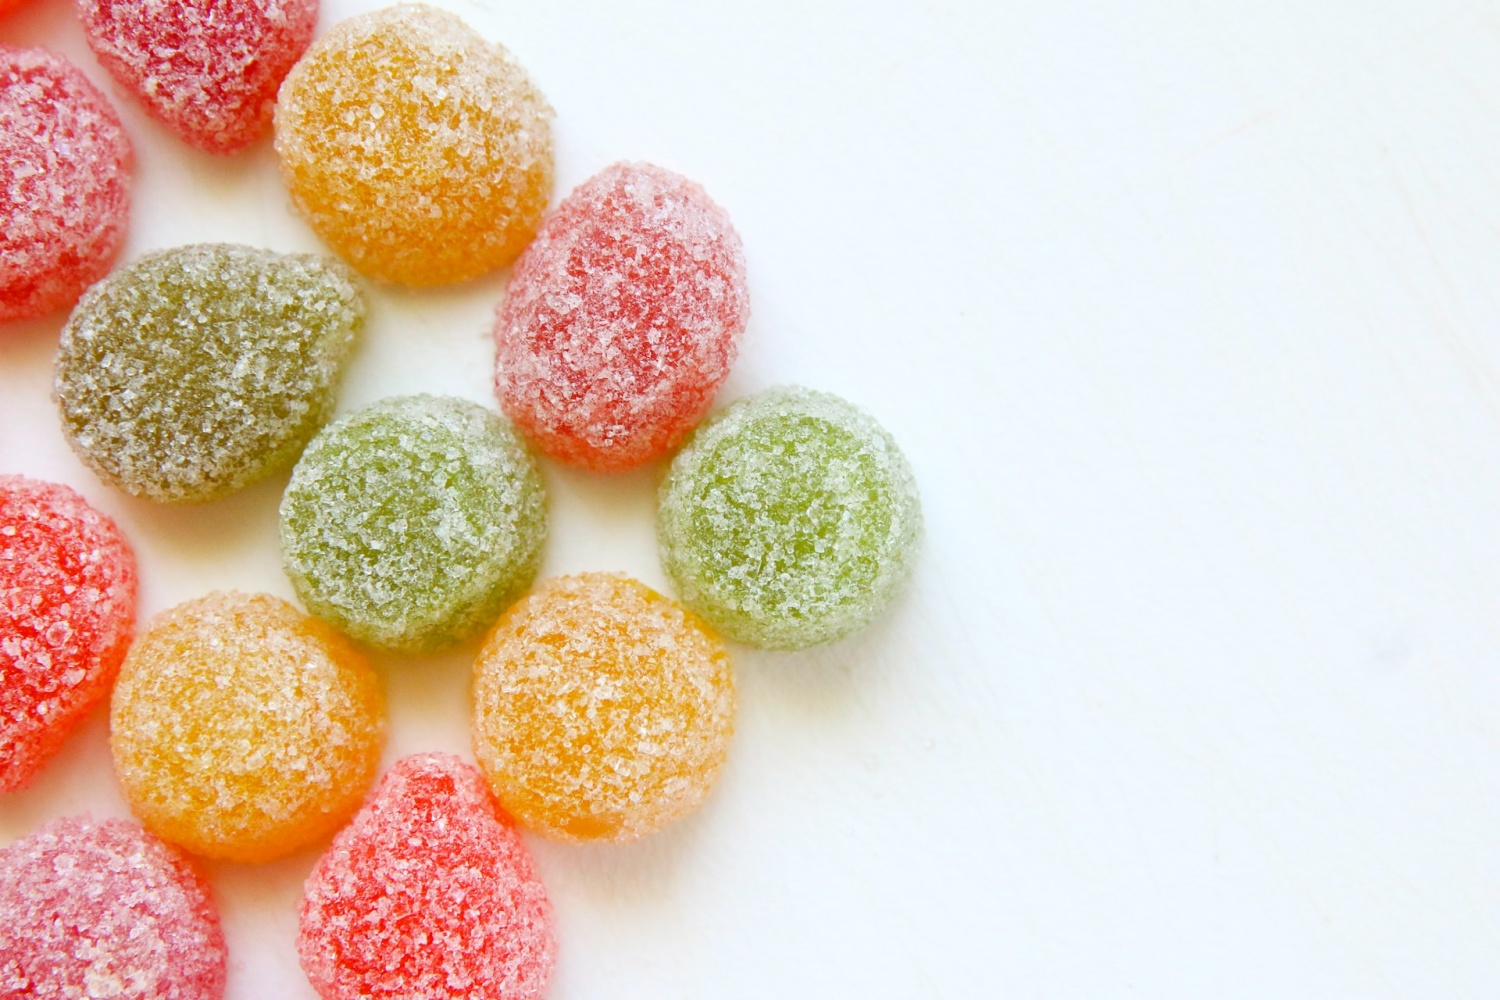 Does Eating Sour Candy Help With a Panic Attack?